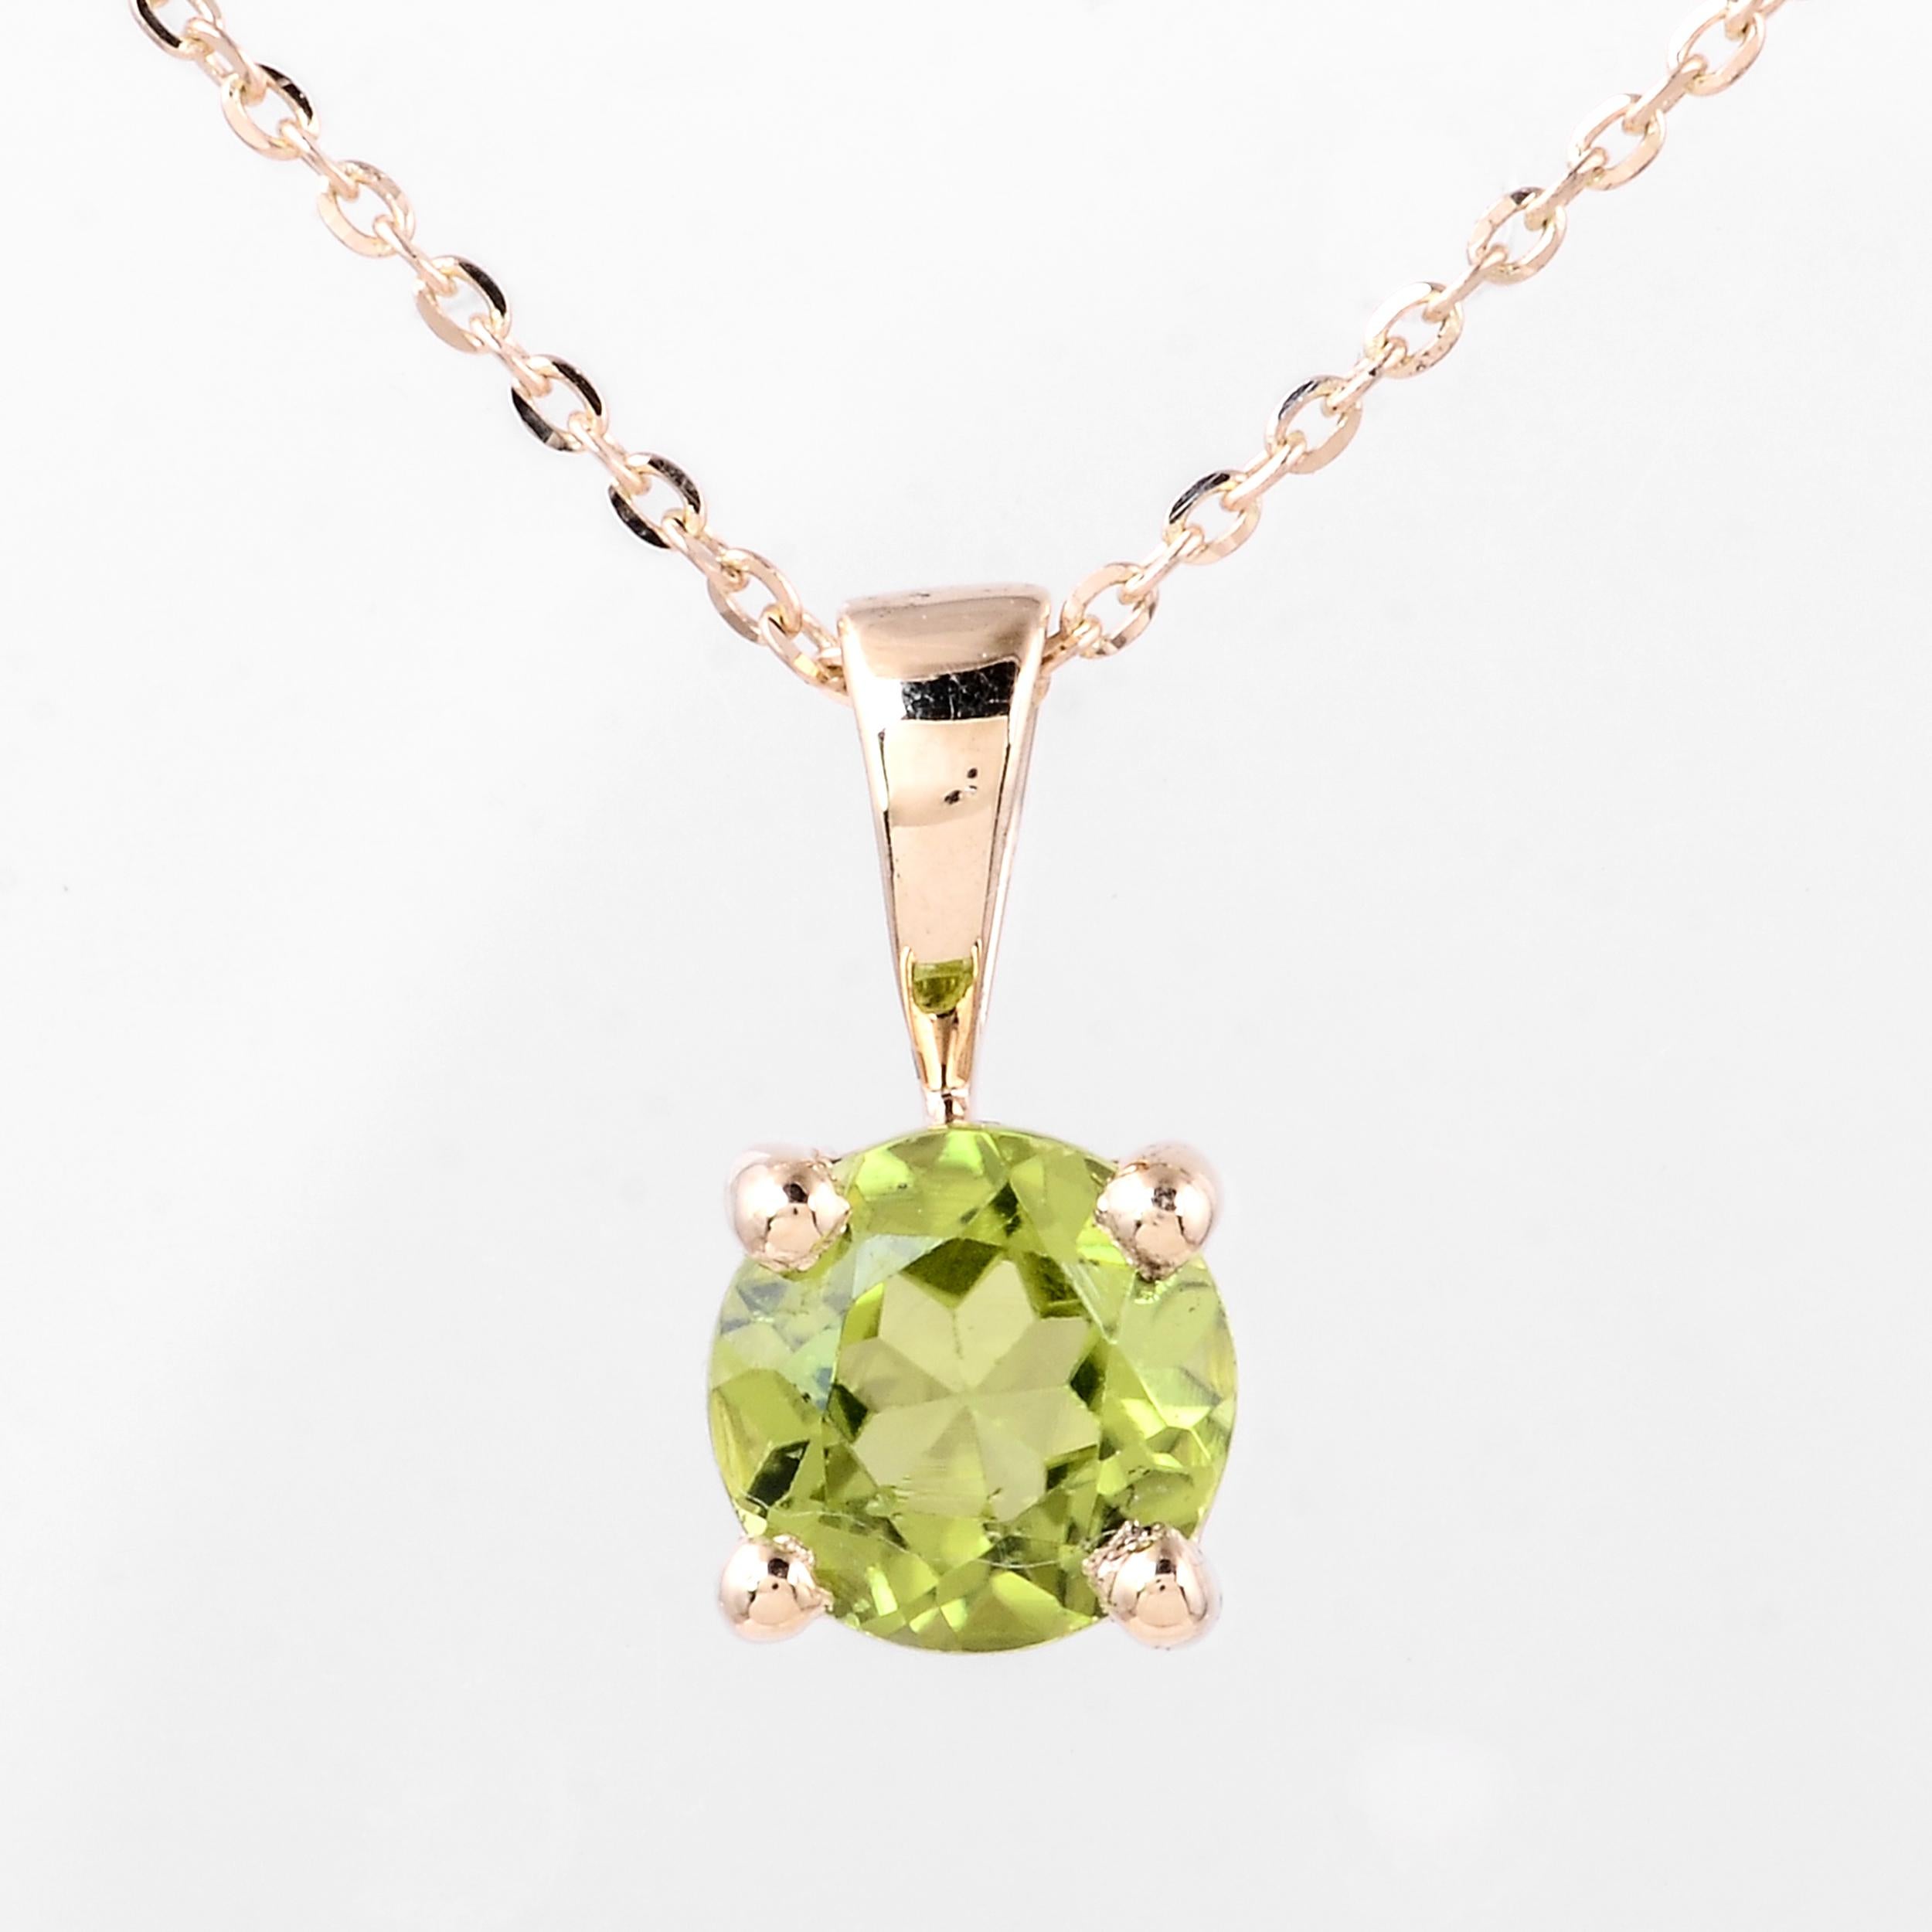 Brilliant Cut Luxury 14K Peridot Pendant Necklace - Exquisite Jewelry for Timeless Elegance For Sale